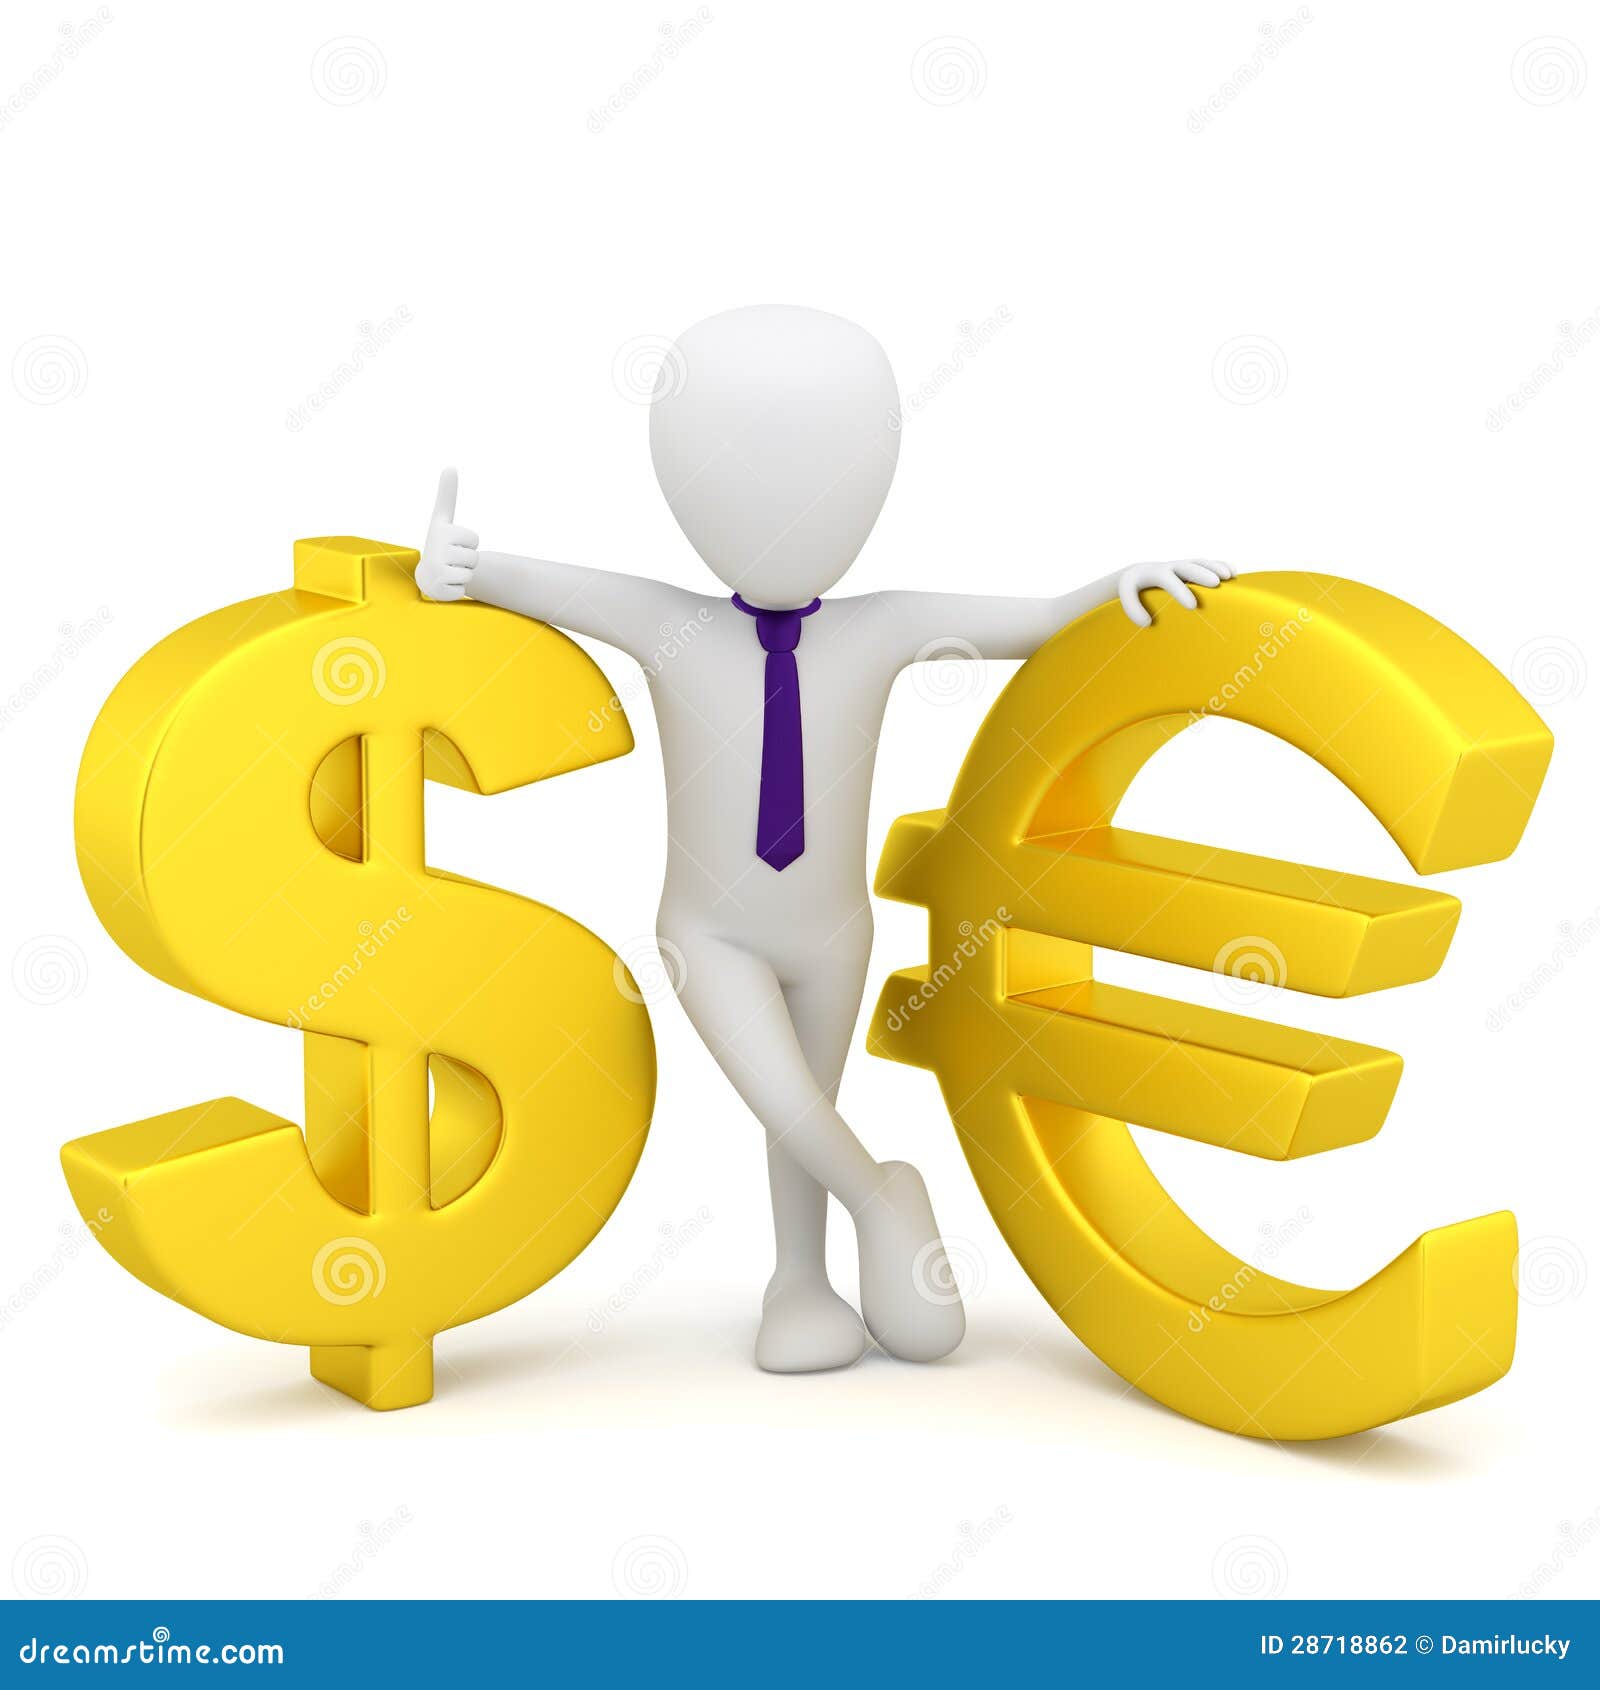 free clipart euro sign - photo #42